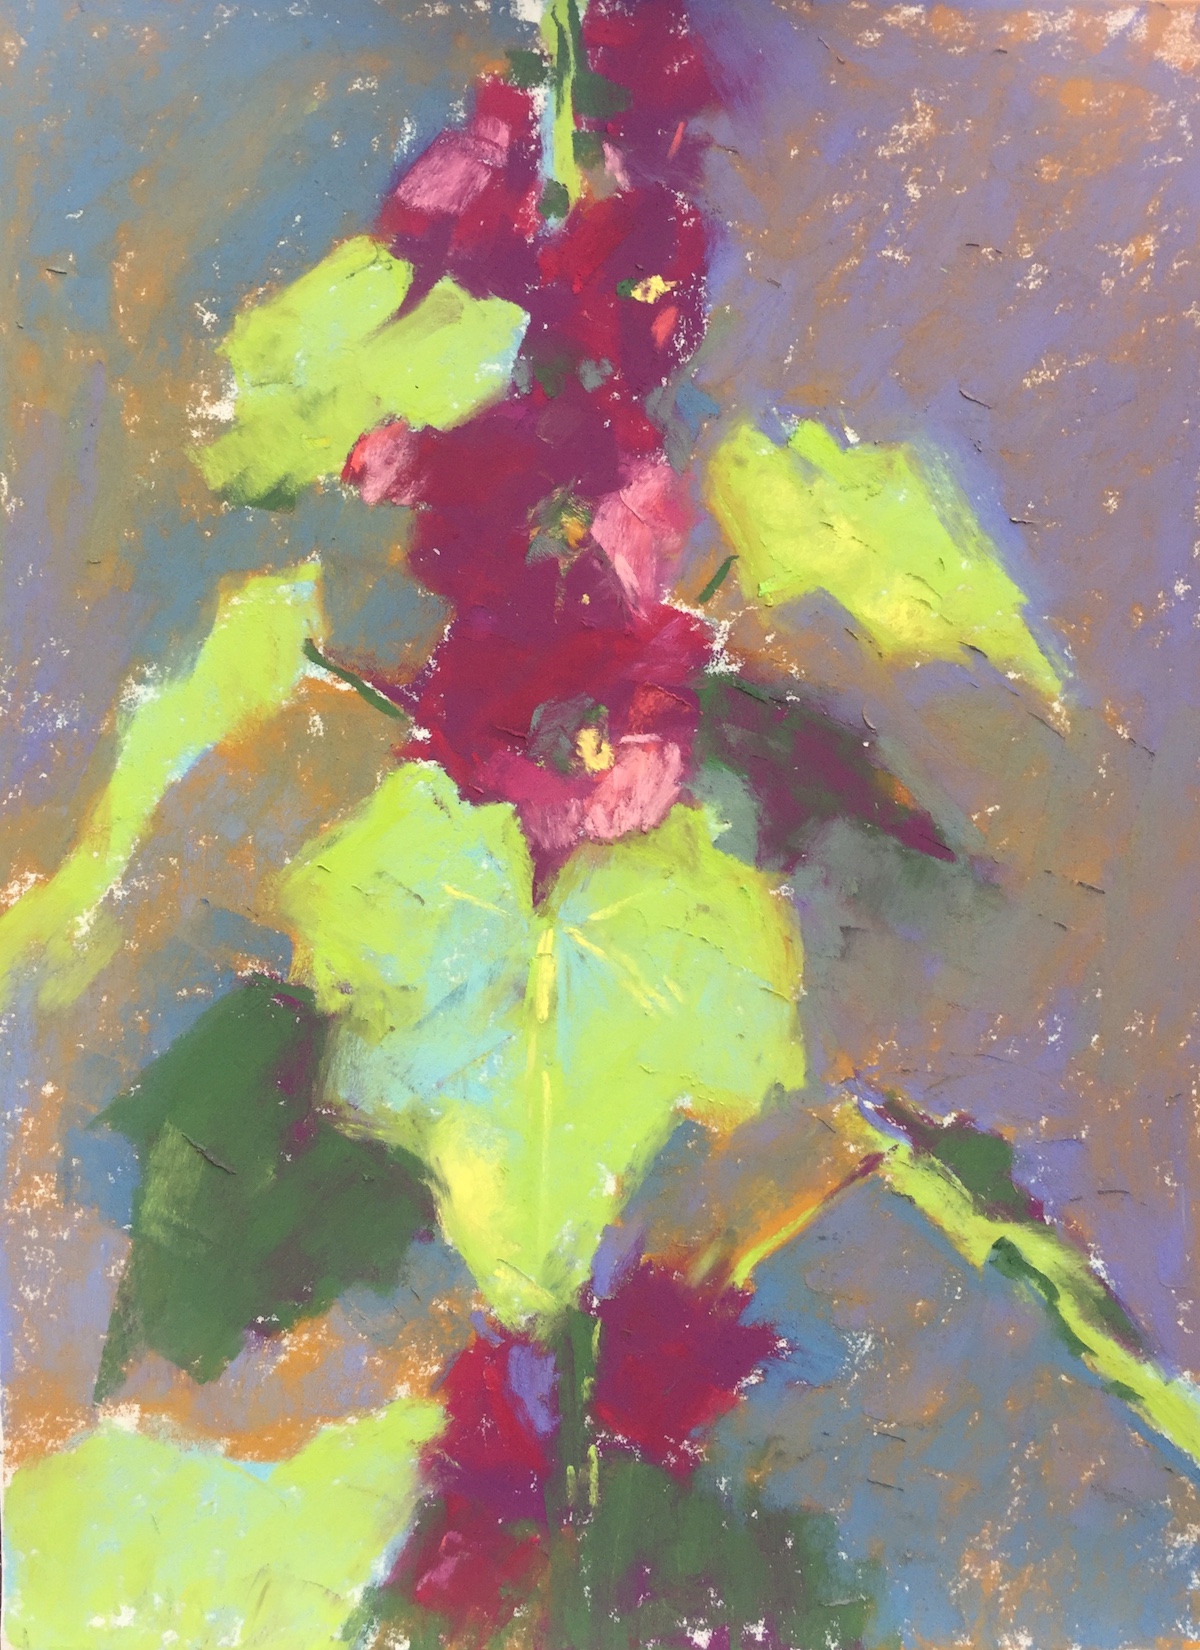 Backyard plein air painting: Shaping the leaves 